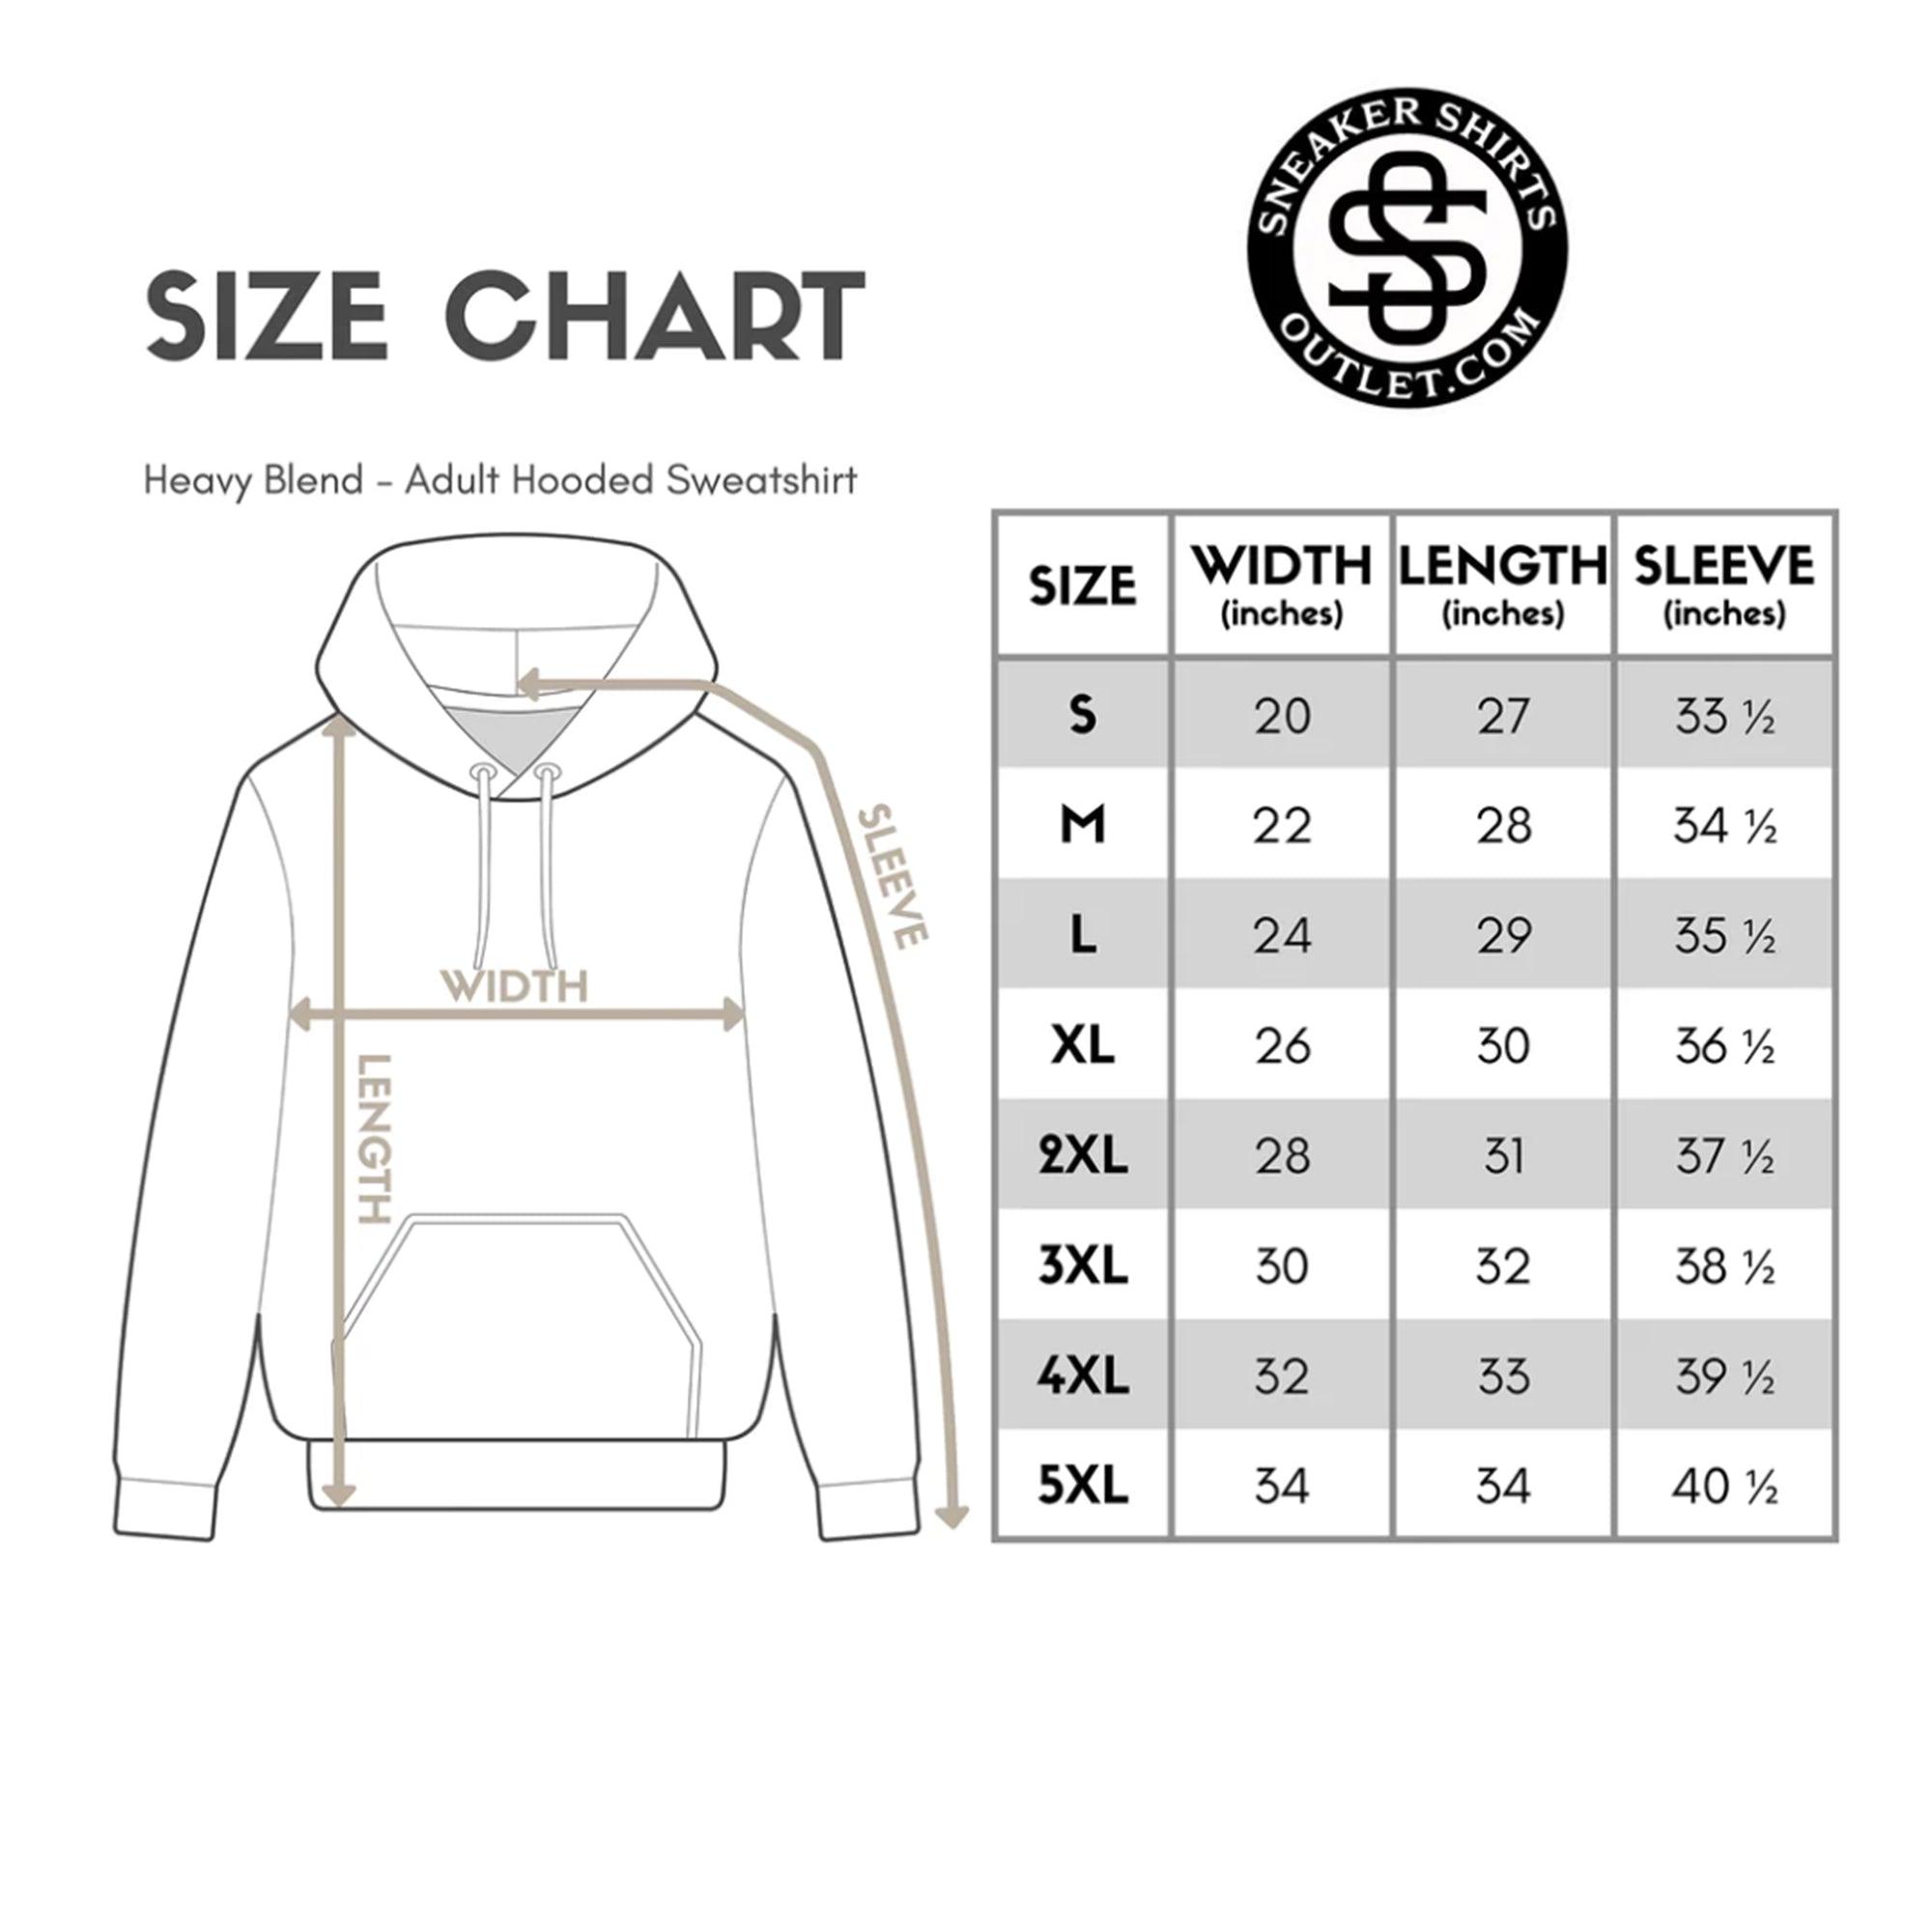 size chart Chicago Hoodie Yeezy Boost 350 V2 Ash Blue 2021 photo